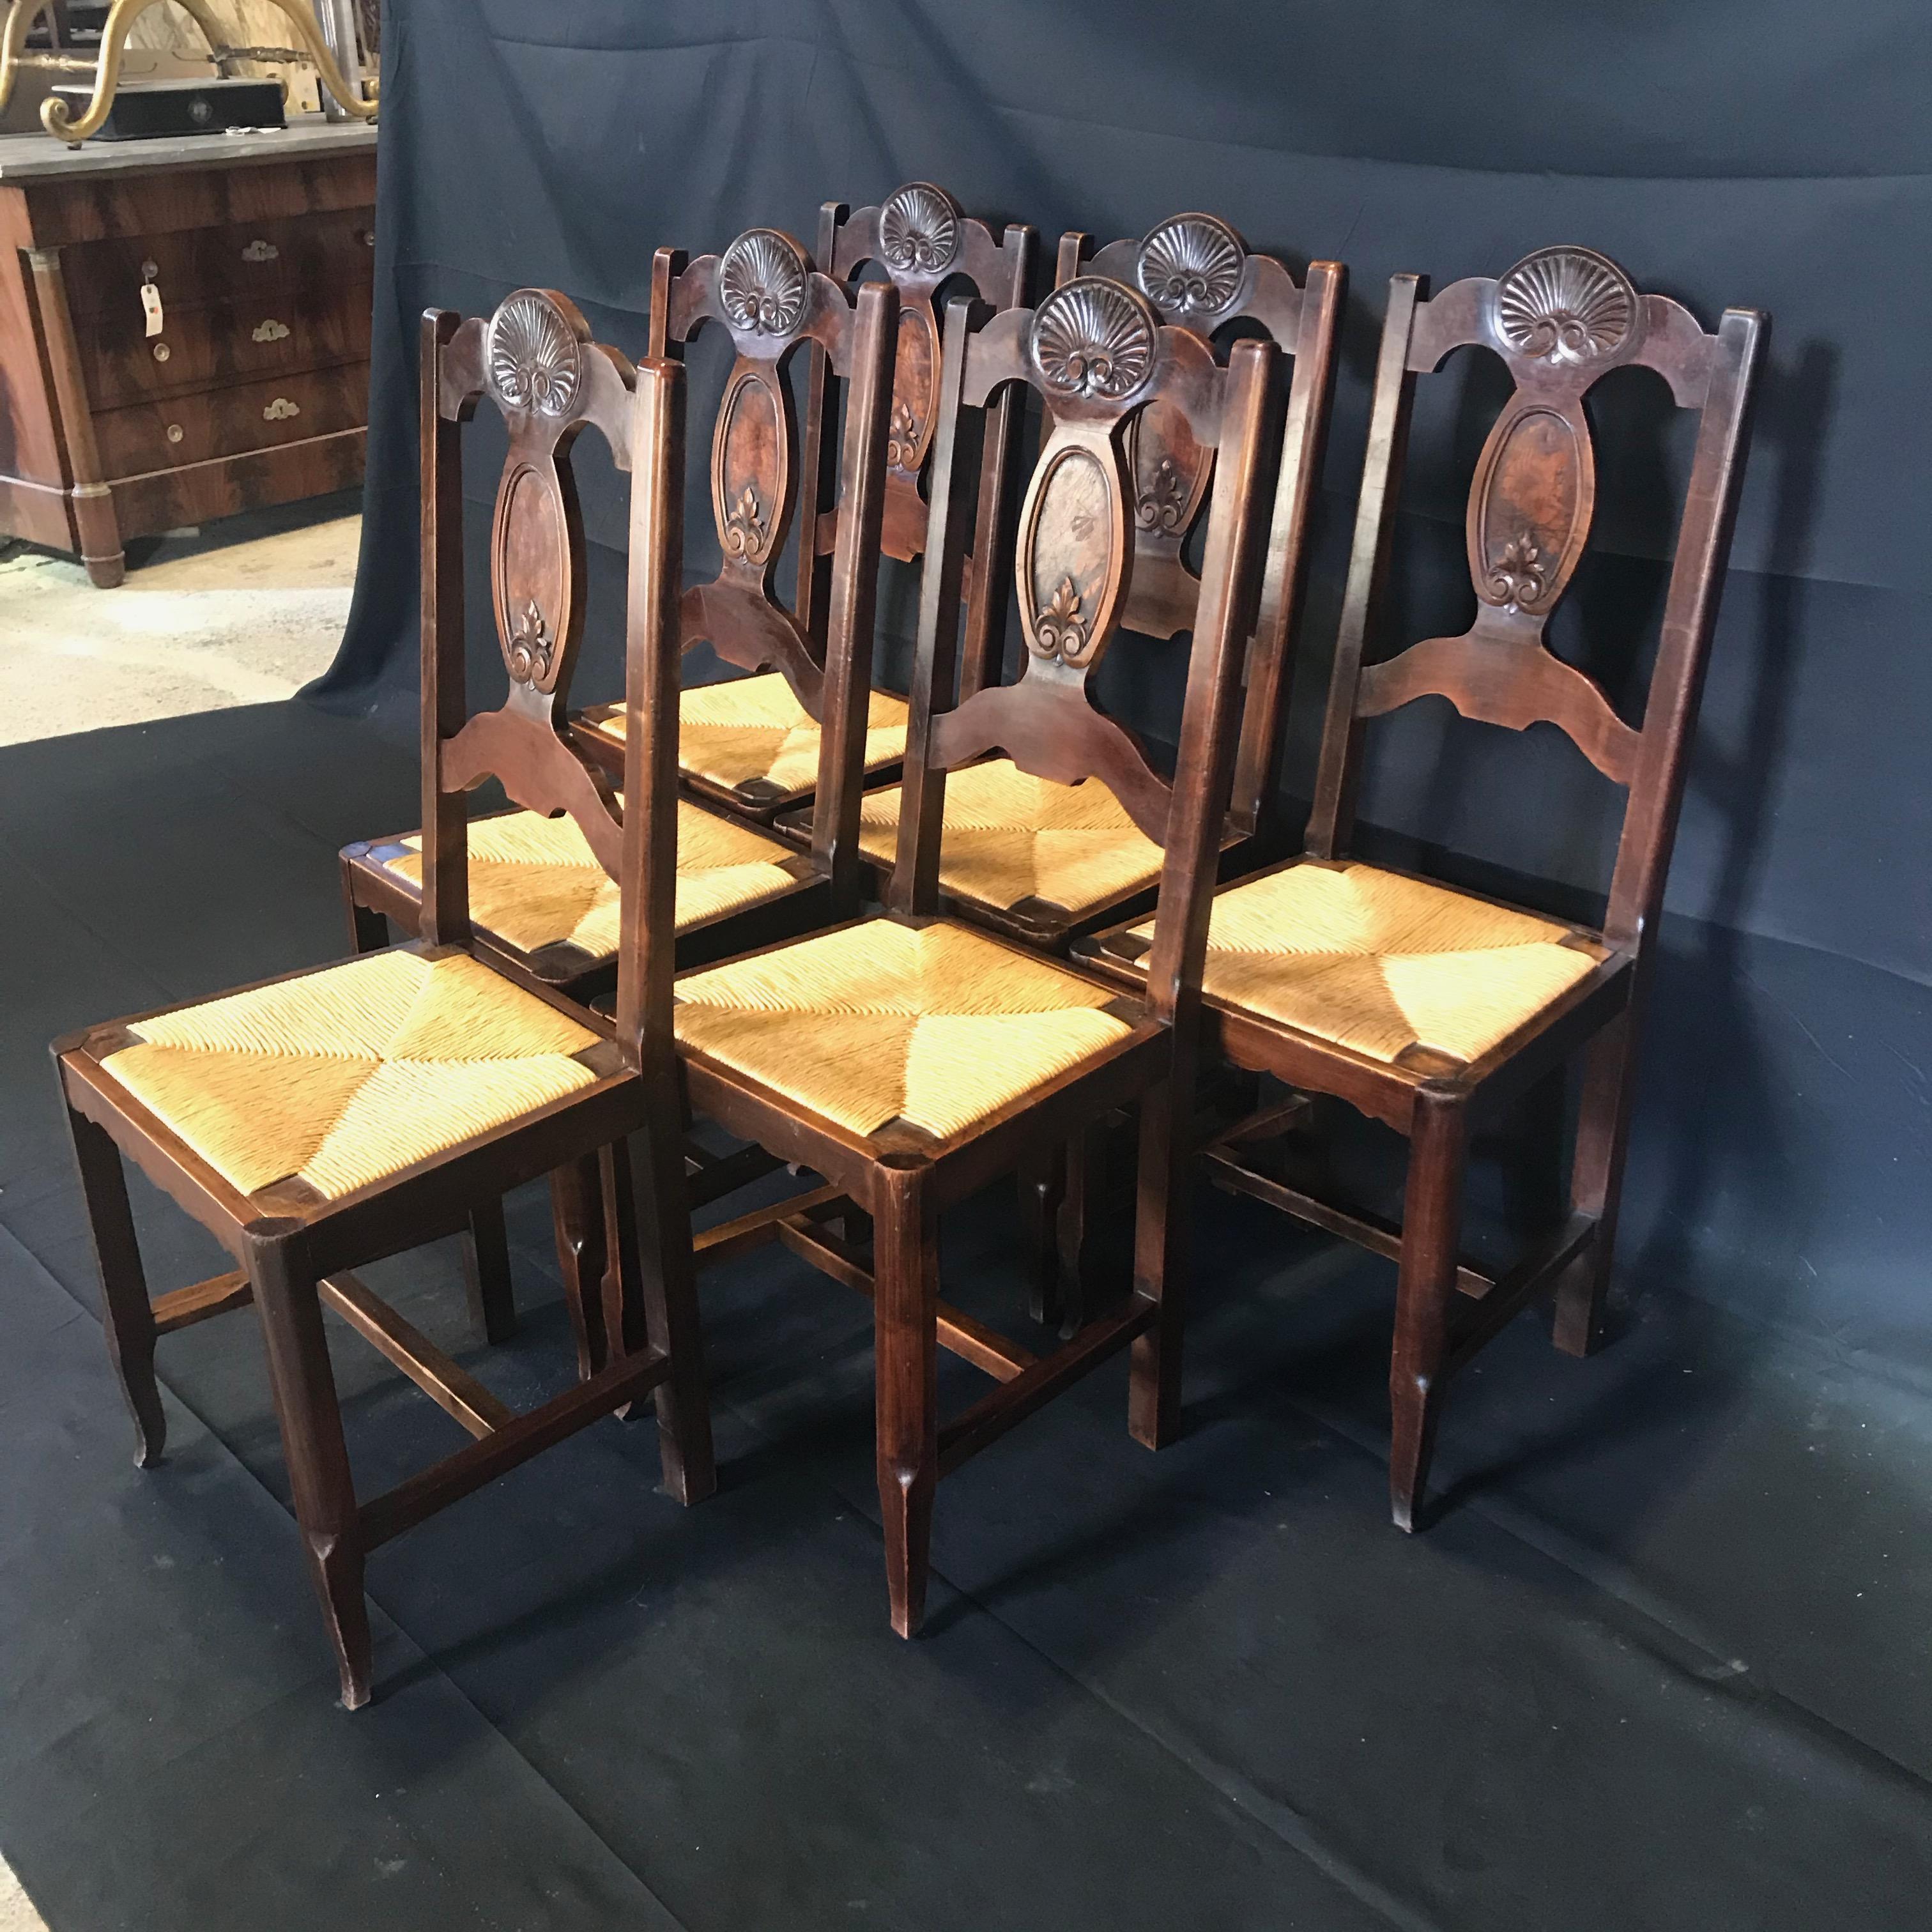 Stunning set of six antique Arts & Crafts or French Country Provincial carved walnut dining chairs with rush seats, all in good condition. Stunning carved shell over an inset burled wood panel, with carved acanthus leaf beneath on back splat.